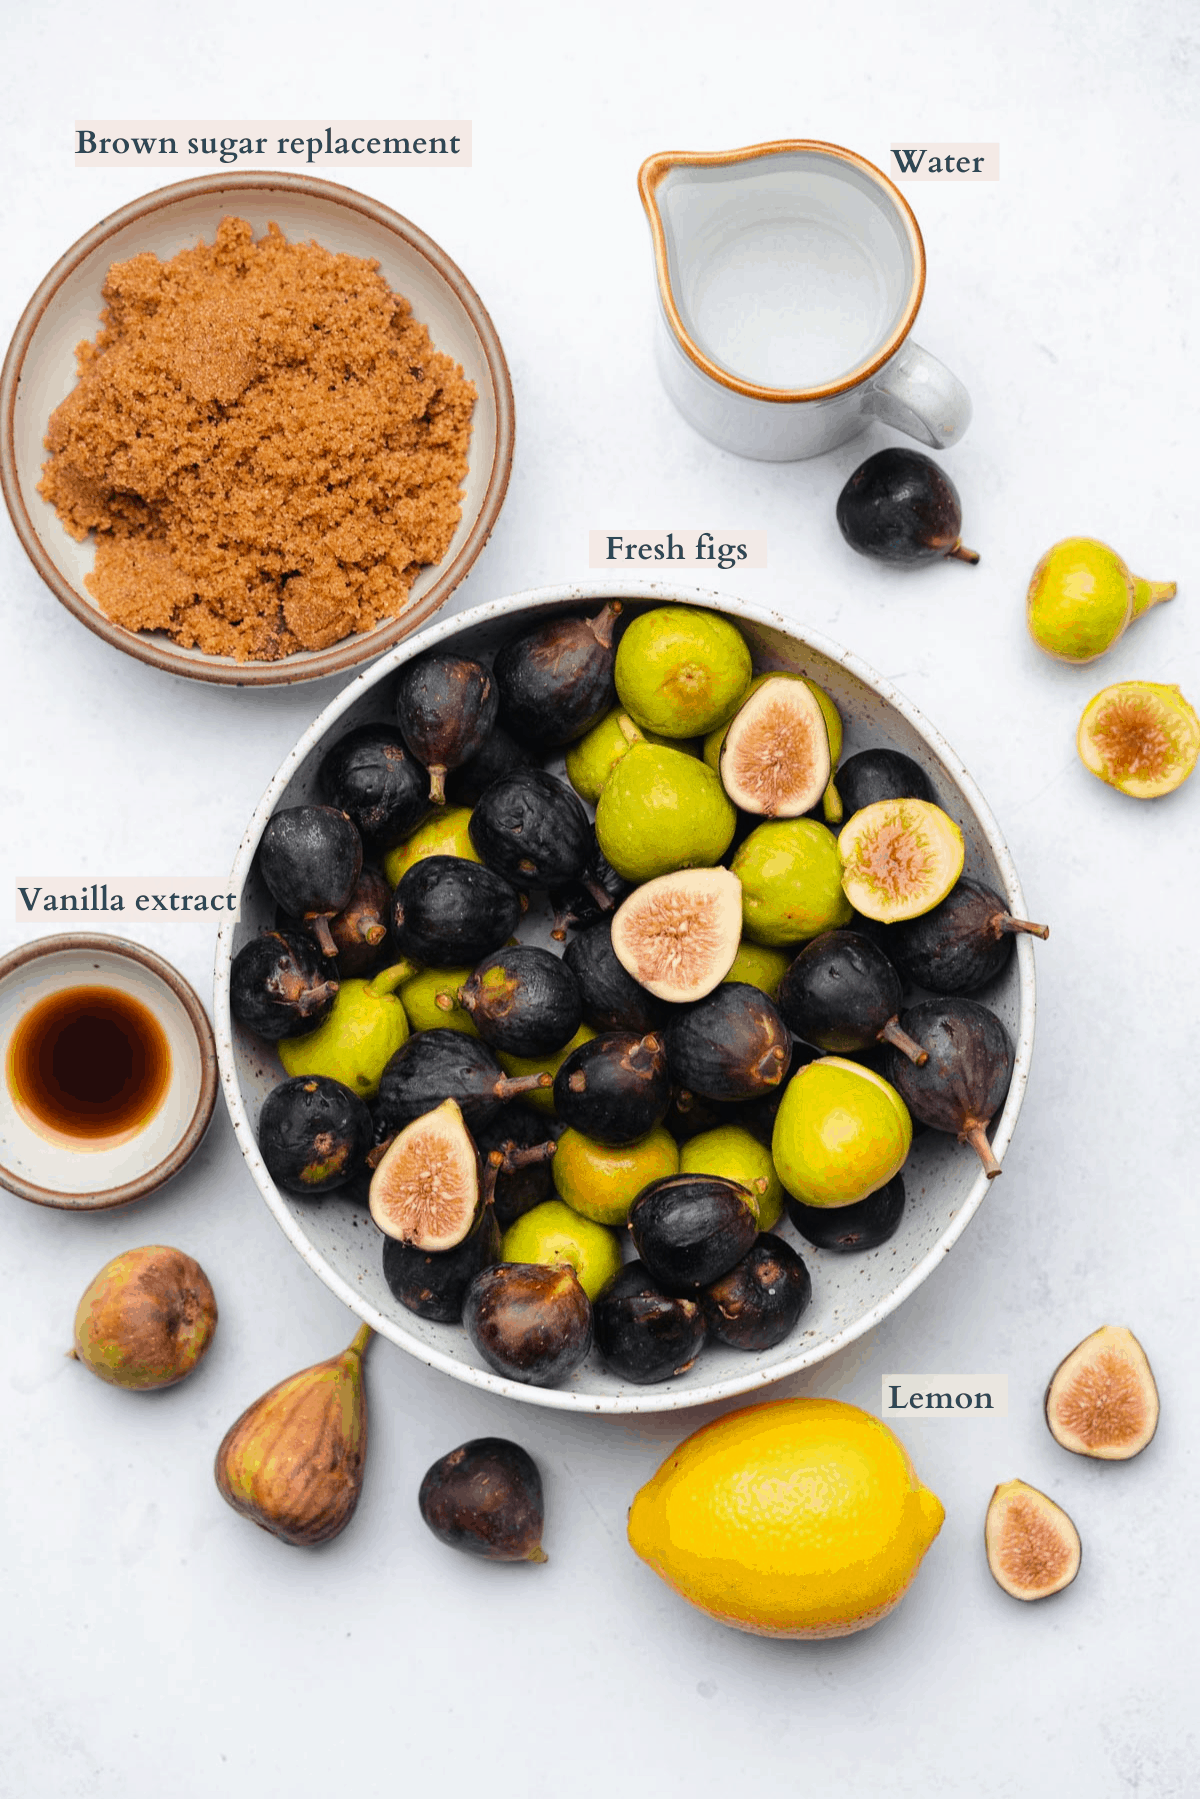 figs spread ingredients with text to denote different ingredients